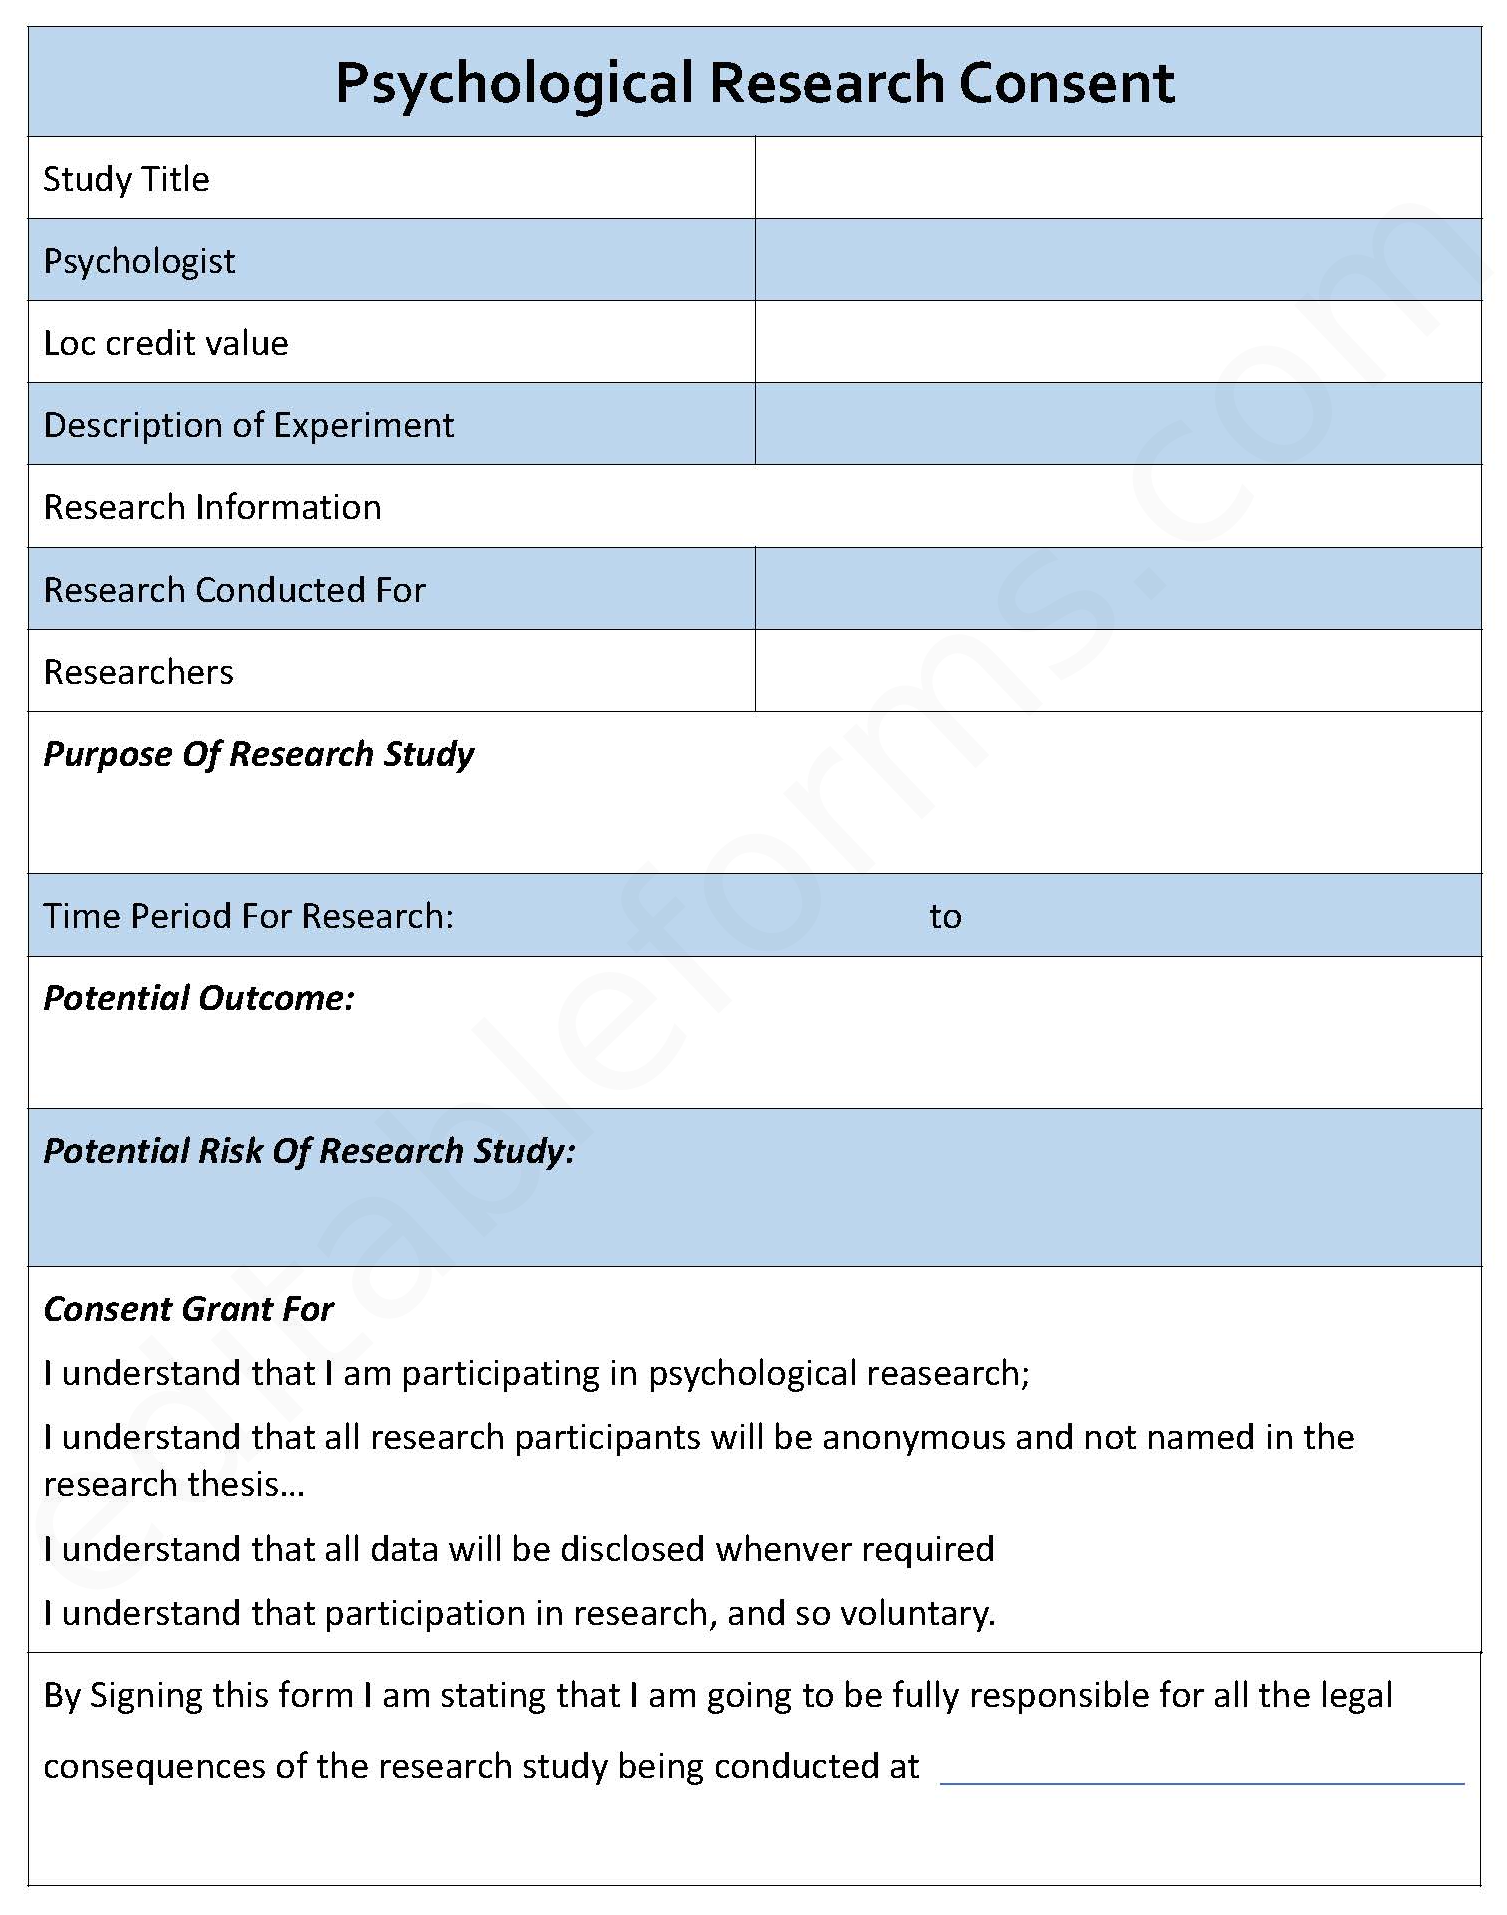 Psychological Research Consent Form